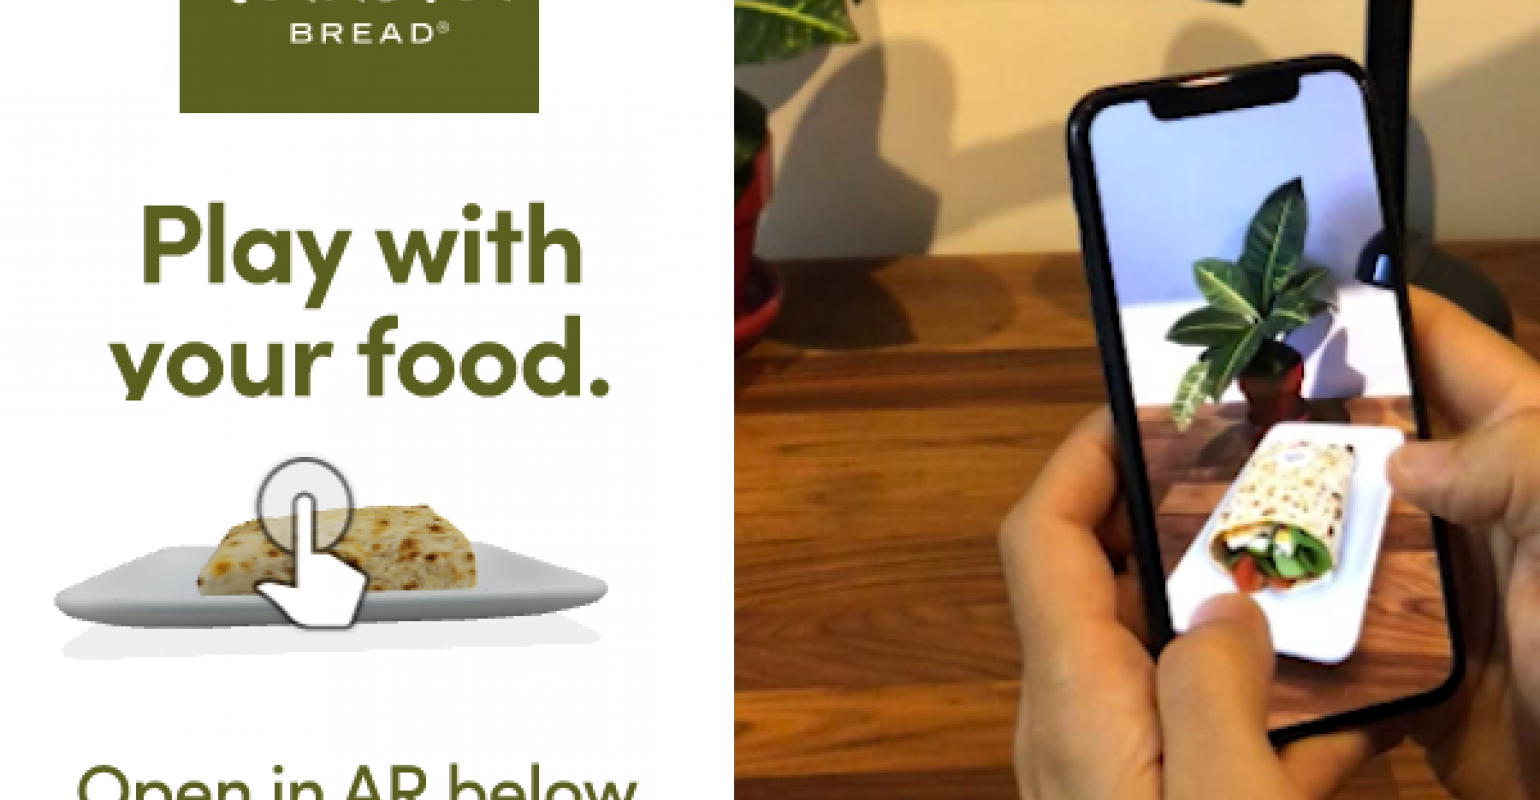 Panera Bread experiments with AR for mobile marketing campaign Nation